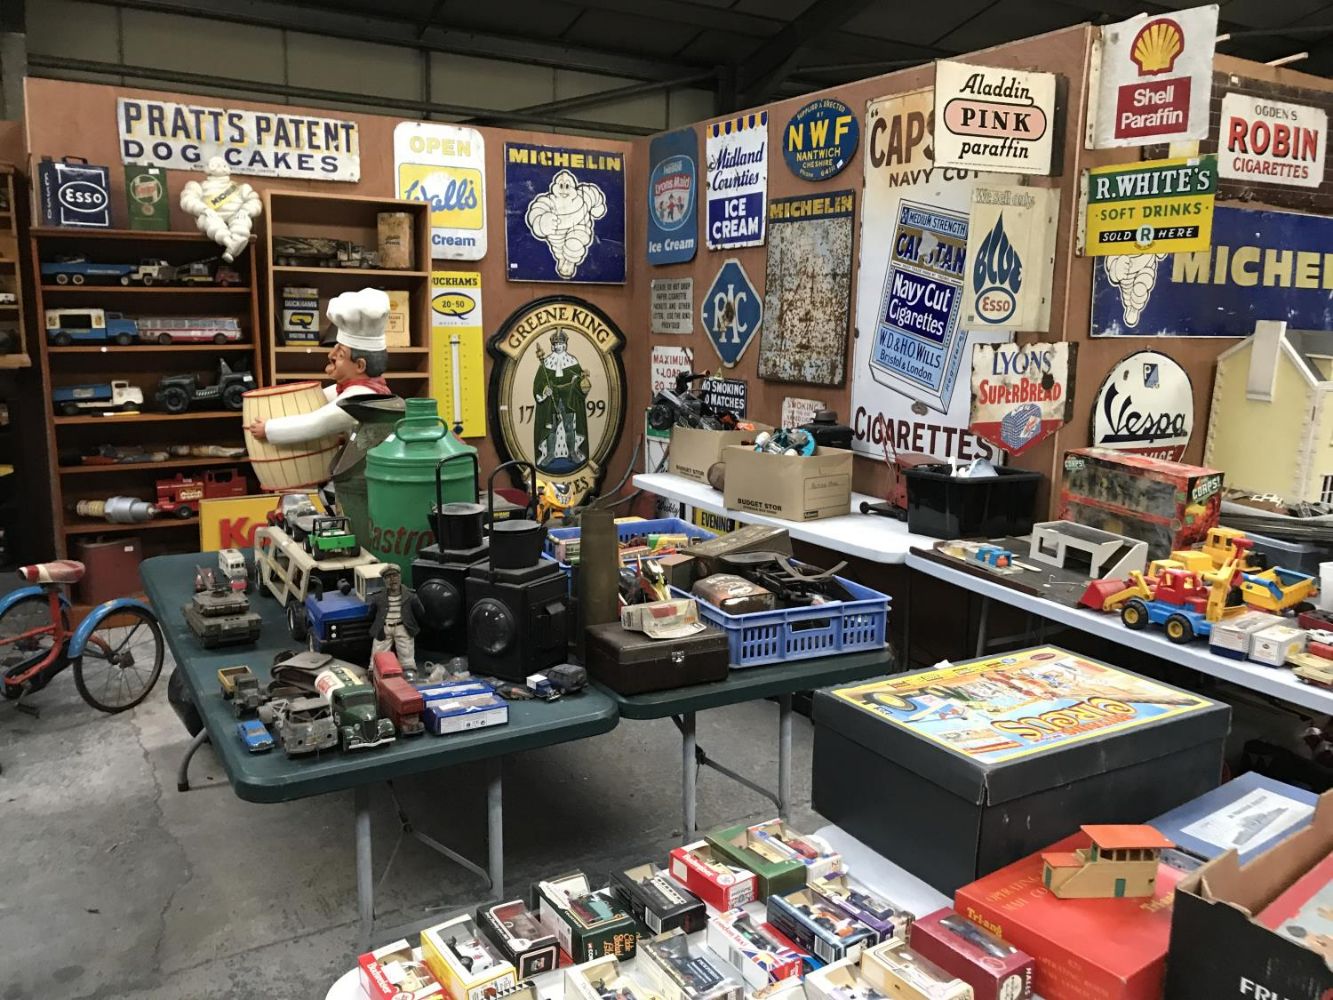 TWO DAY AUCTION OF COLLECTABLES, ANTIQUES, JEWELLERY, FURNITURE, VINTAGE ITEMS, TOOLS ETC. INC  A  SPECIAL SALE OF COLLECTABLE COINS AND STAMPS